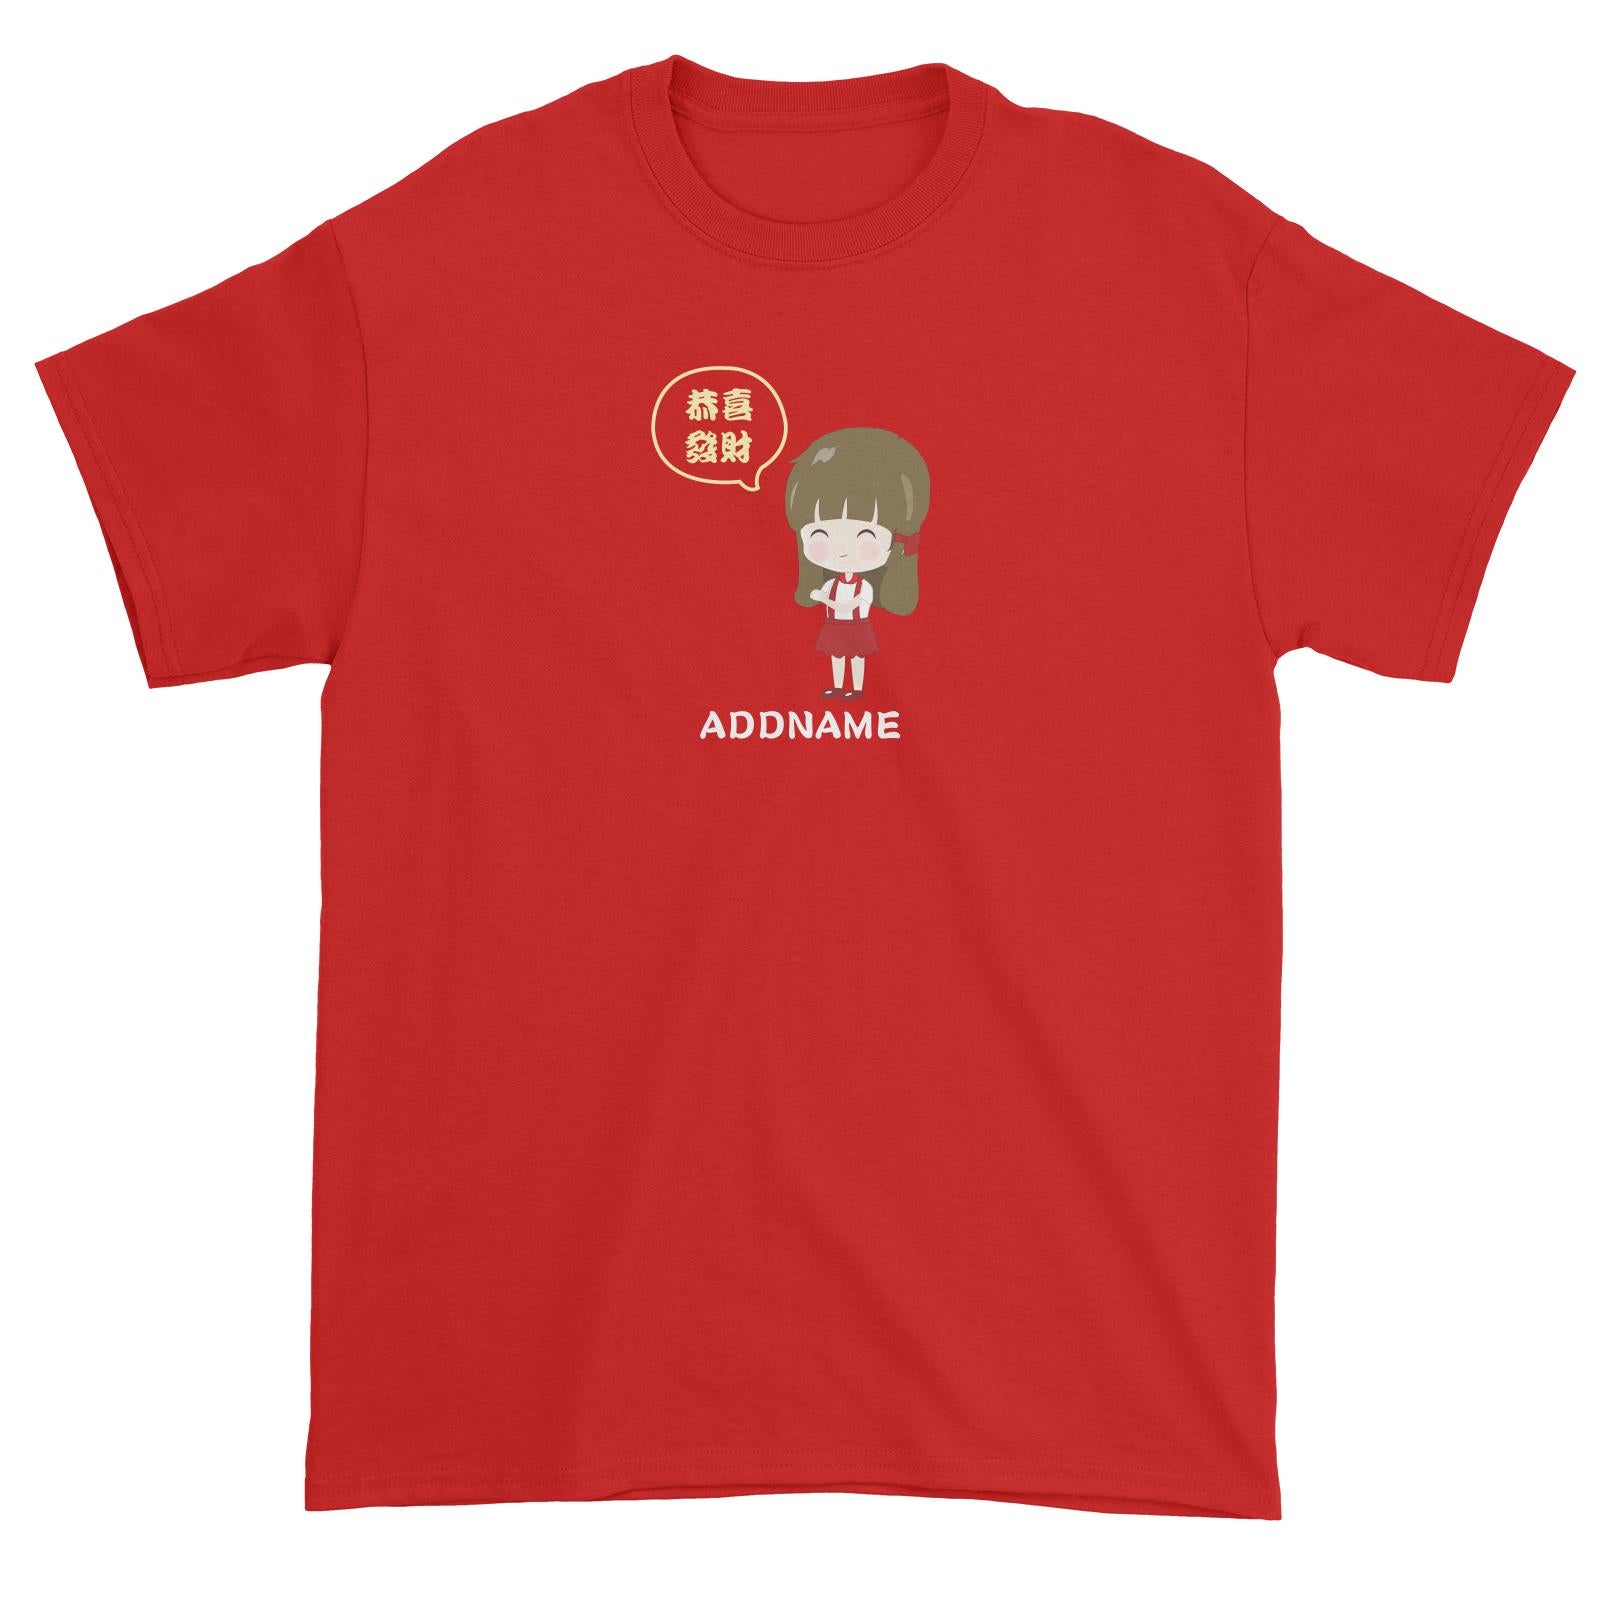 Chinese New Year Family Gong Xi Fai Cai Girl Addname Unisex T-Shirt